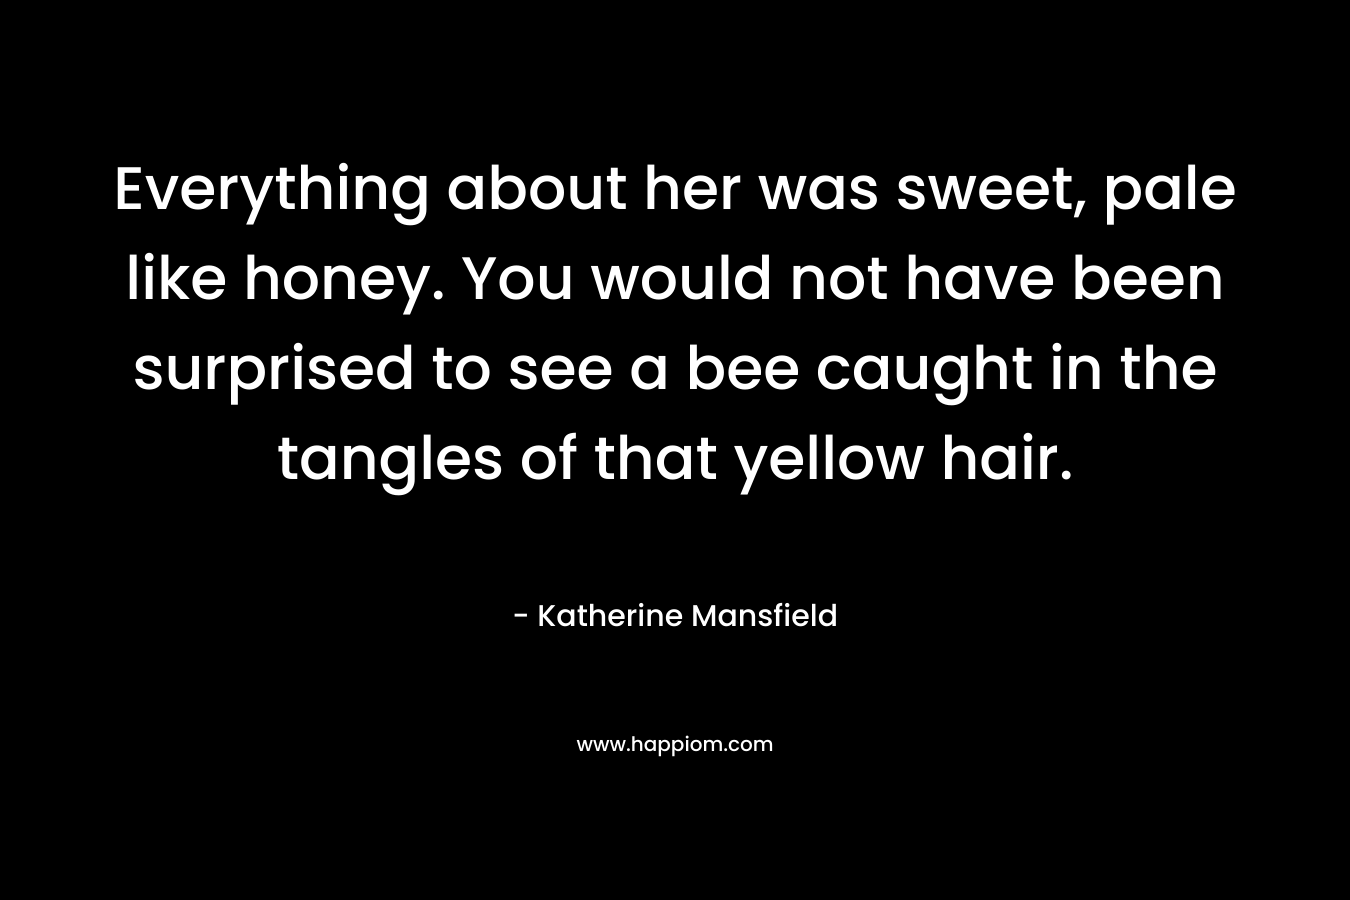 Everything about her was sweet, pale like honey. You would not have been surprised to see a bee caught in the tangles of that yellow hair.